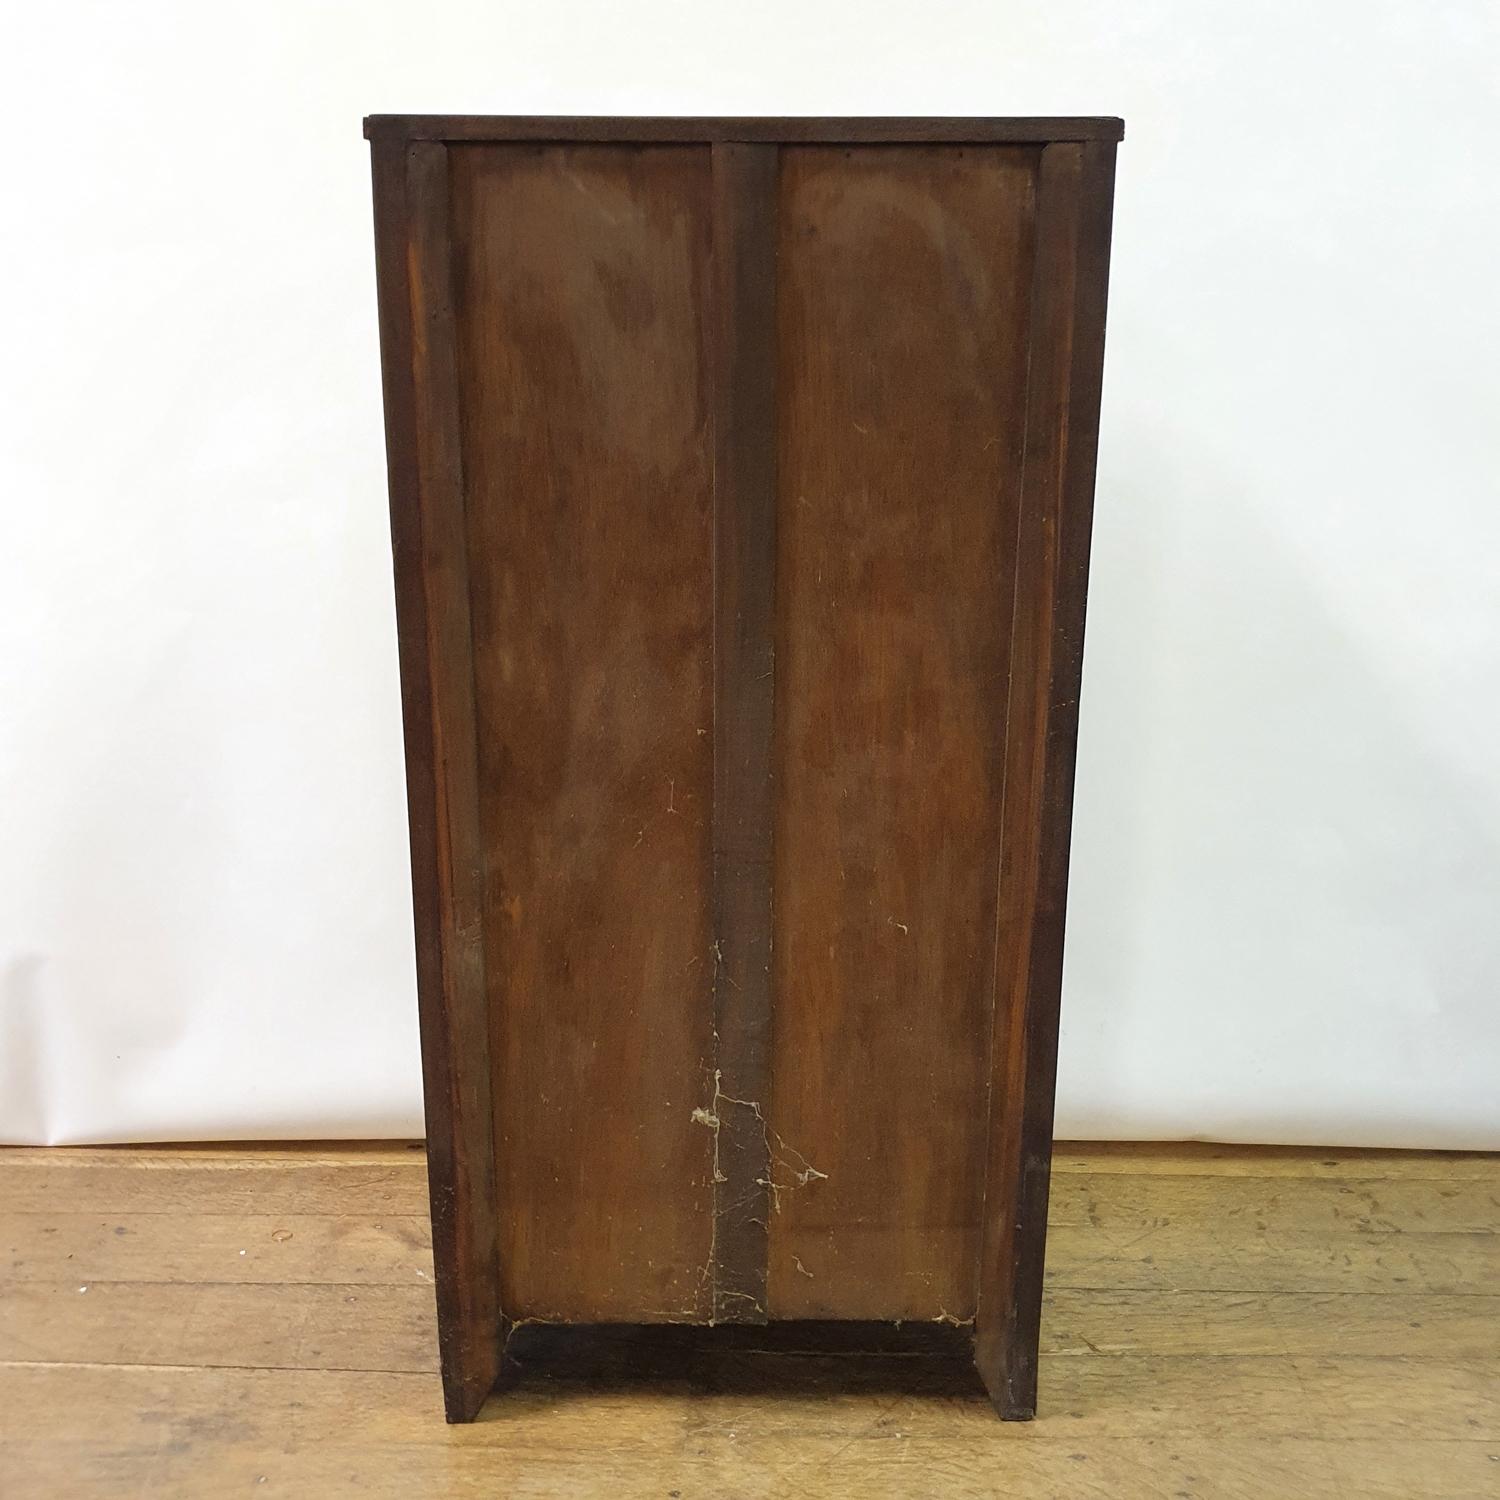 A 19th century rosewood and marquetry inlaid music cabinet, 54 cm wide - Image 8 of 11